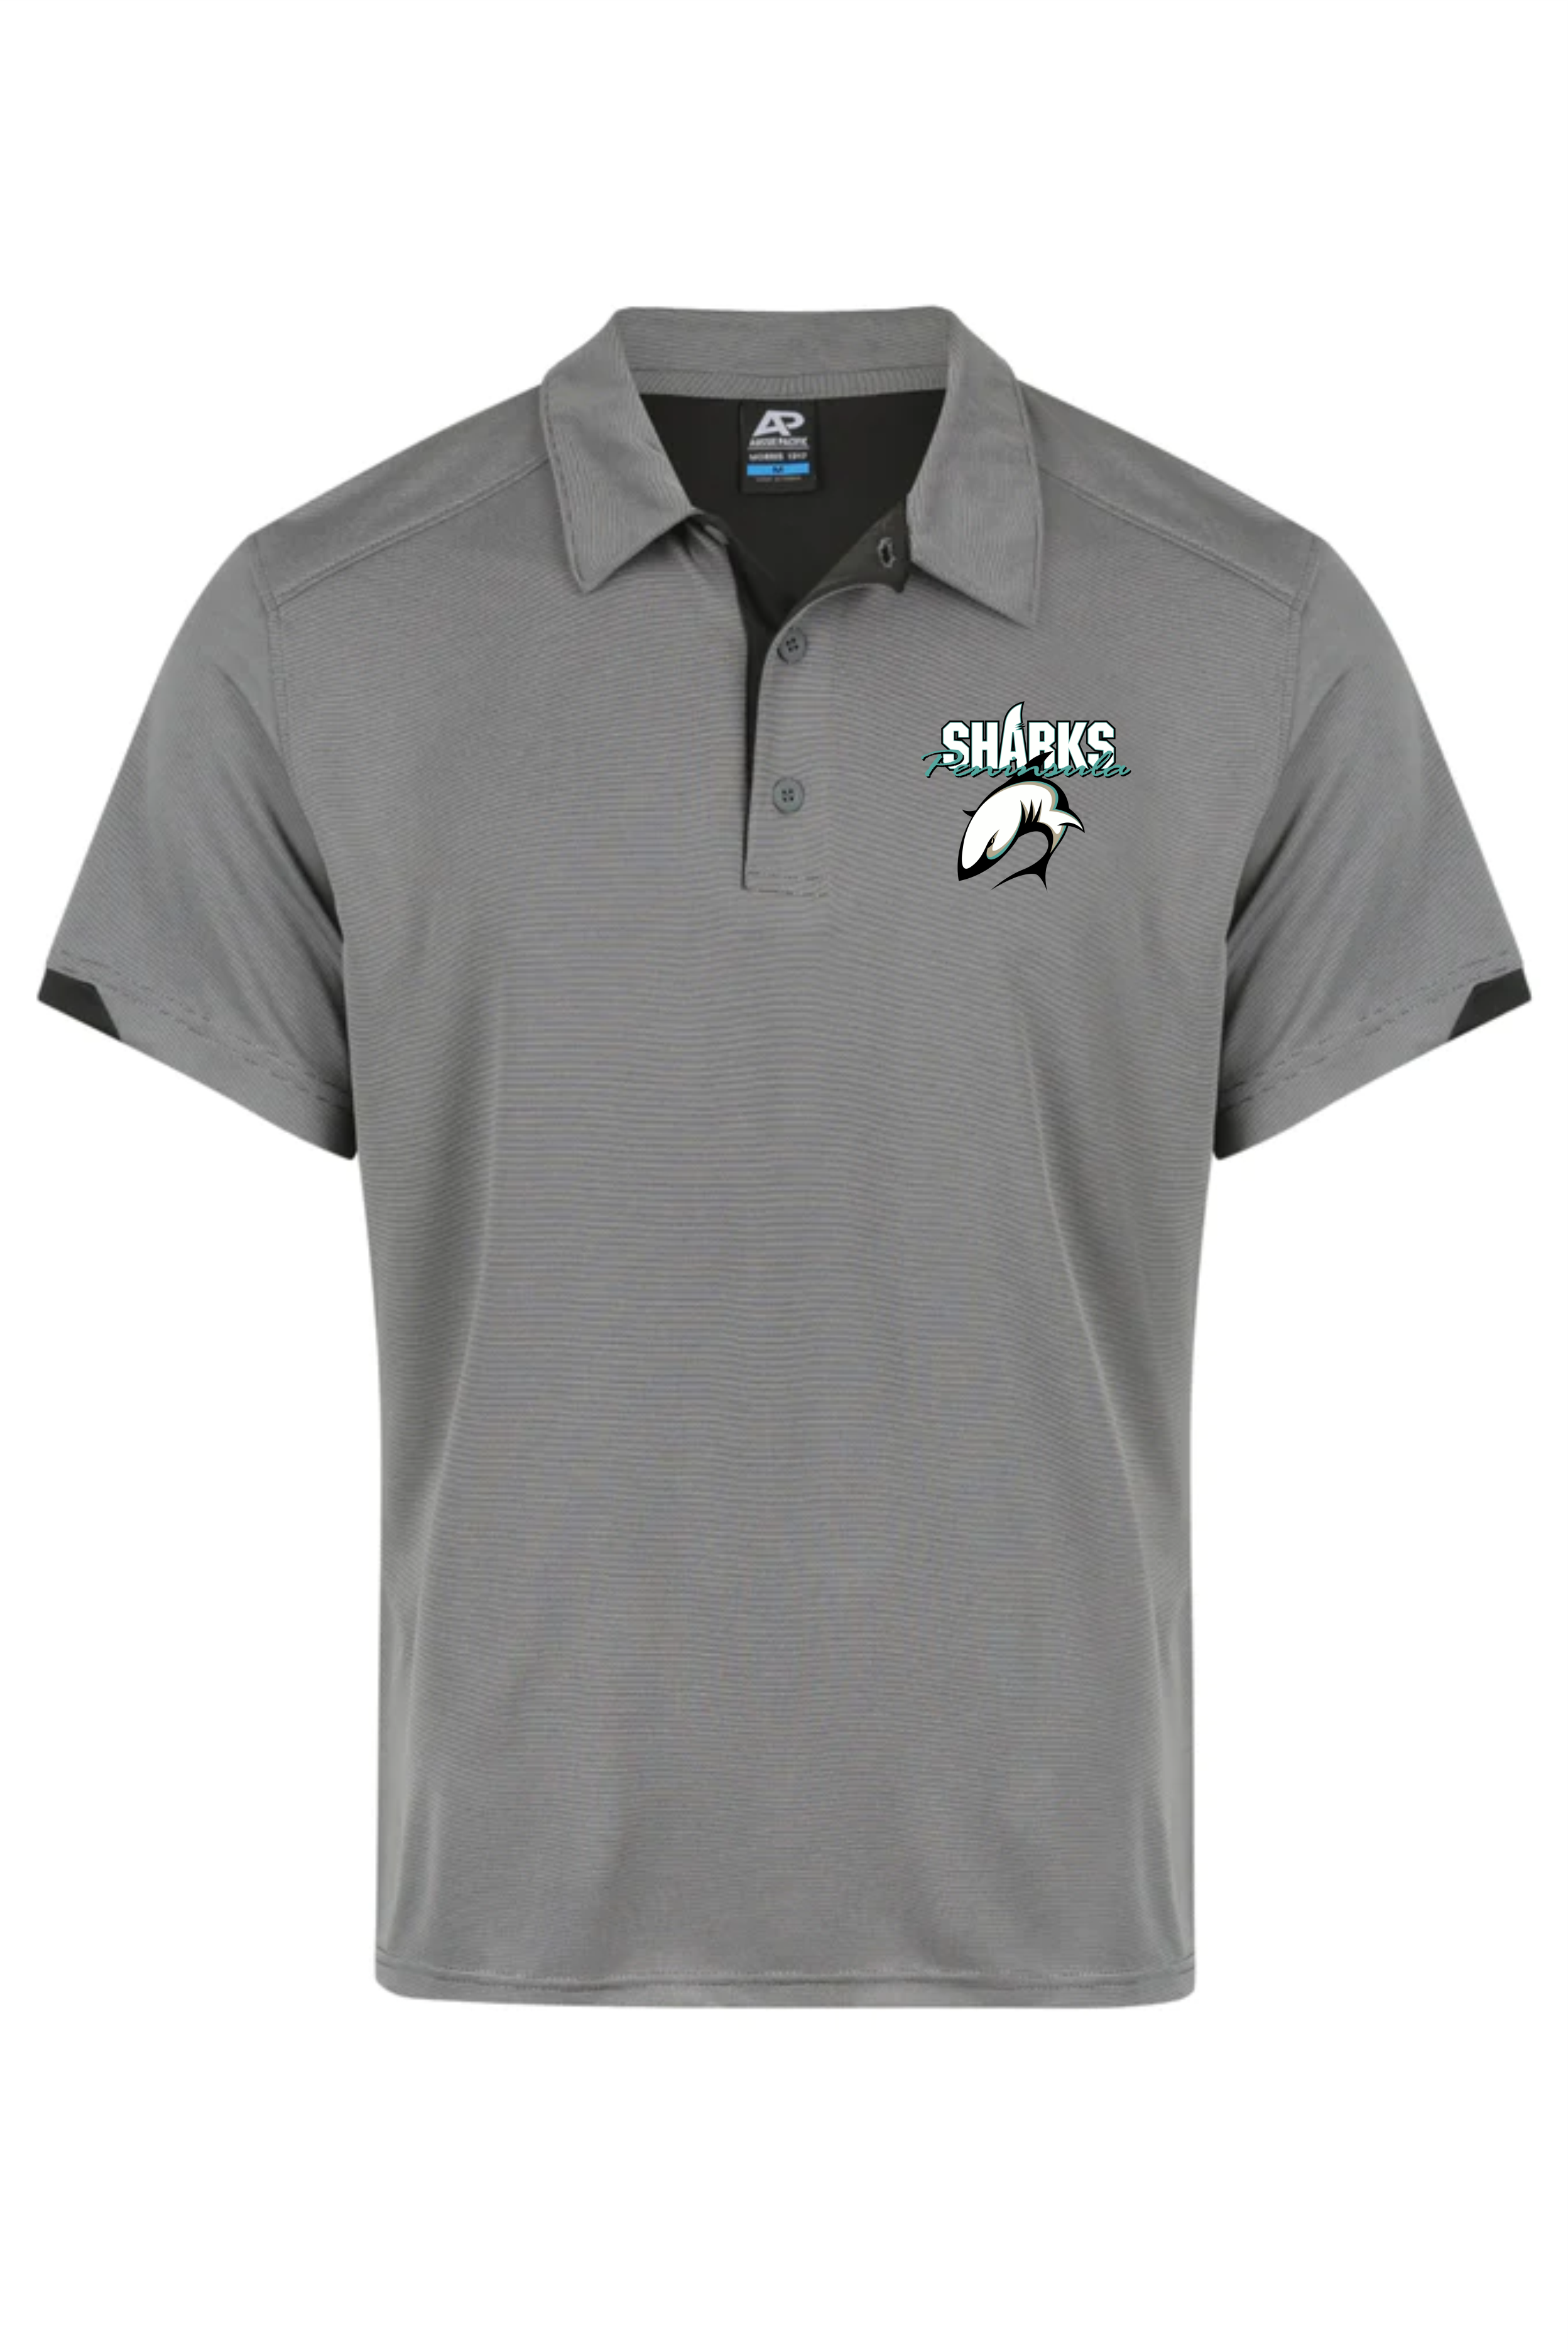 Sharks Unisex Club Polo – Black Marle with White